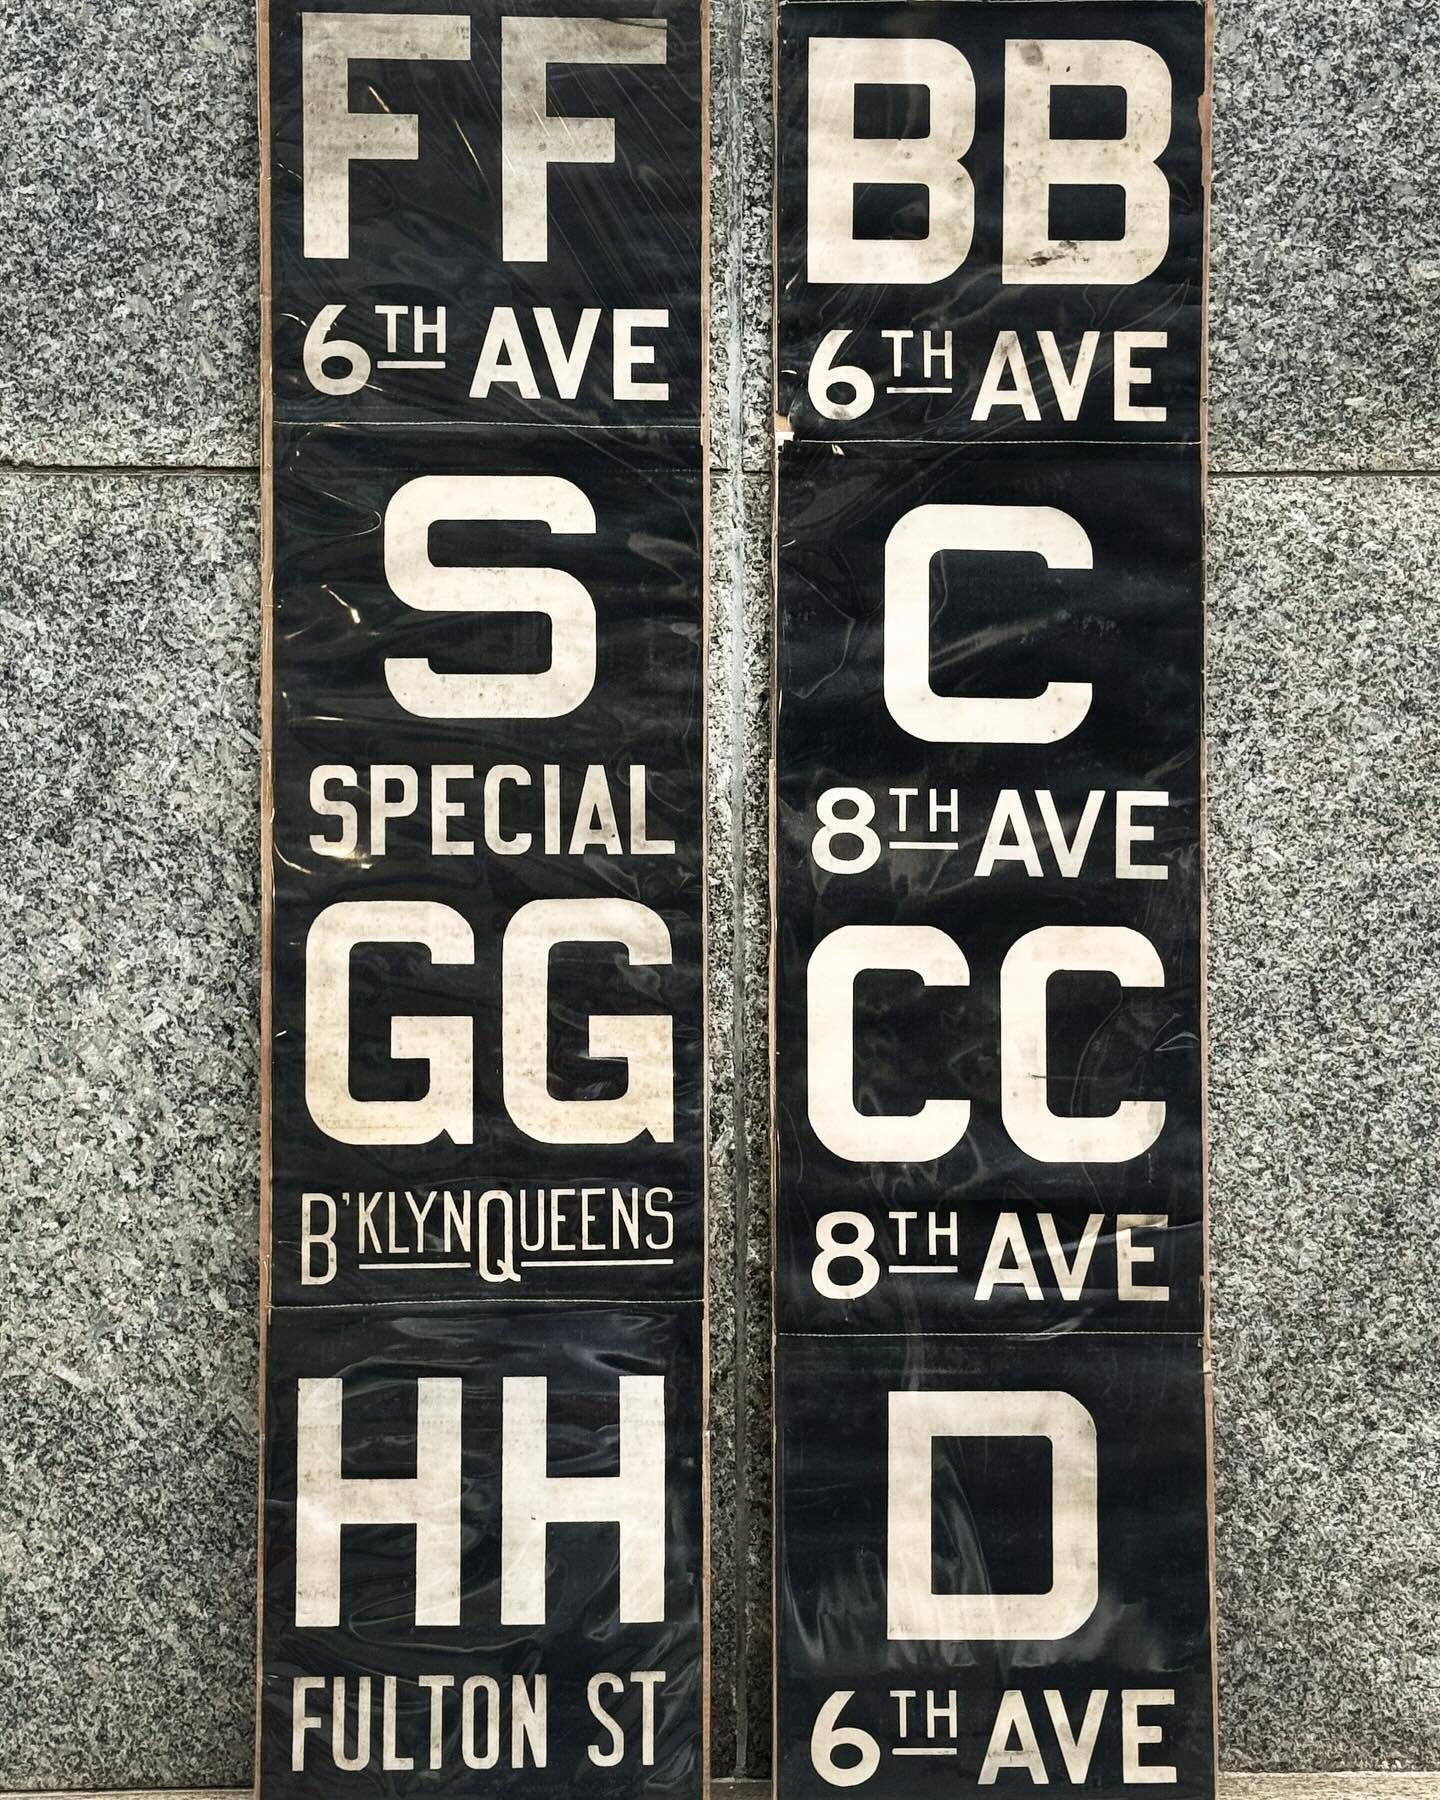 1960&rsquo;s NYC Subway Roll Signs &bull; 60&rdquo; x 14&rdquo; &bull; SOLD
&bull;
&bull;
&bull;
&bull;
&bull;
#mta #subway #nycsubway #vintagenewyork #8thave #6thave #avenue #fultonstreet #nextstop #1960s #oldnewyork #signage #decor #design #interio